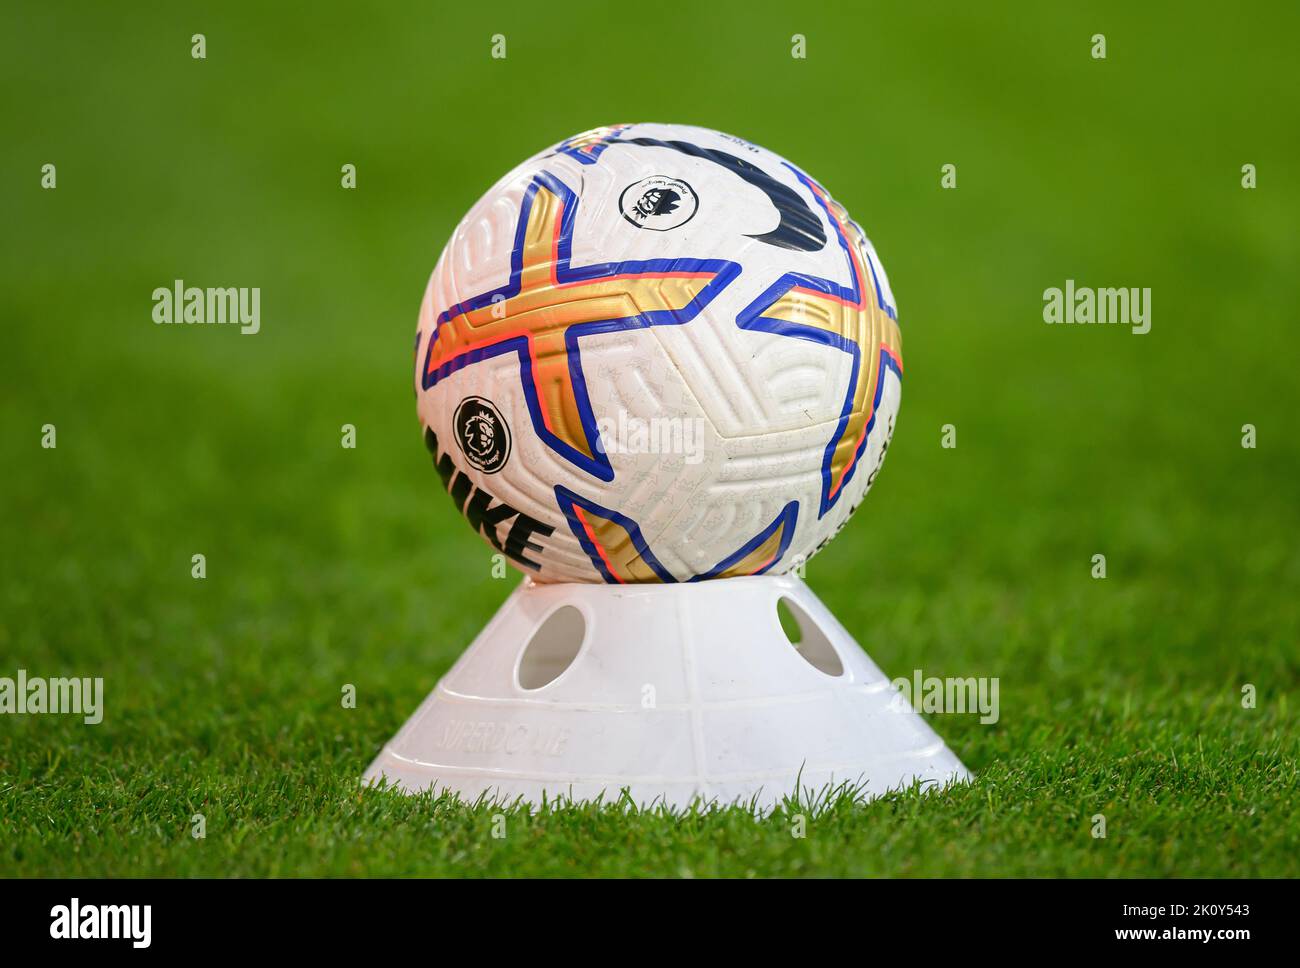 30 Aug 2022 - Crystal Palace v Brentford - Premier League - Selhurst Park  The official Nike match ball sits on a cone used in the multiball system during the match at Selhurst Park.  Picture : Mark Pain / Alamy Live News Stock Photo